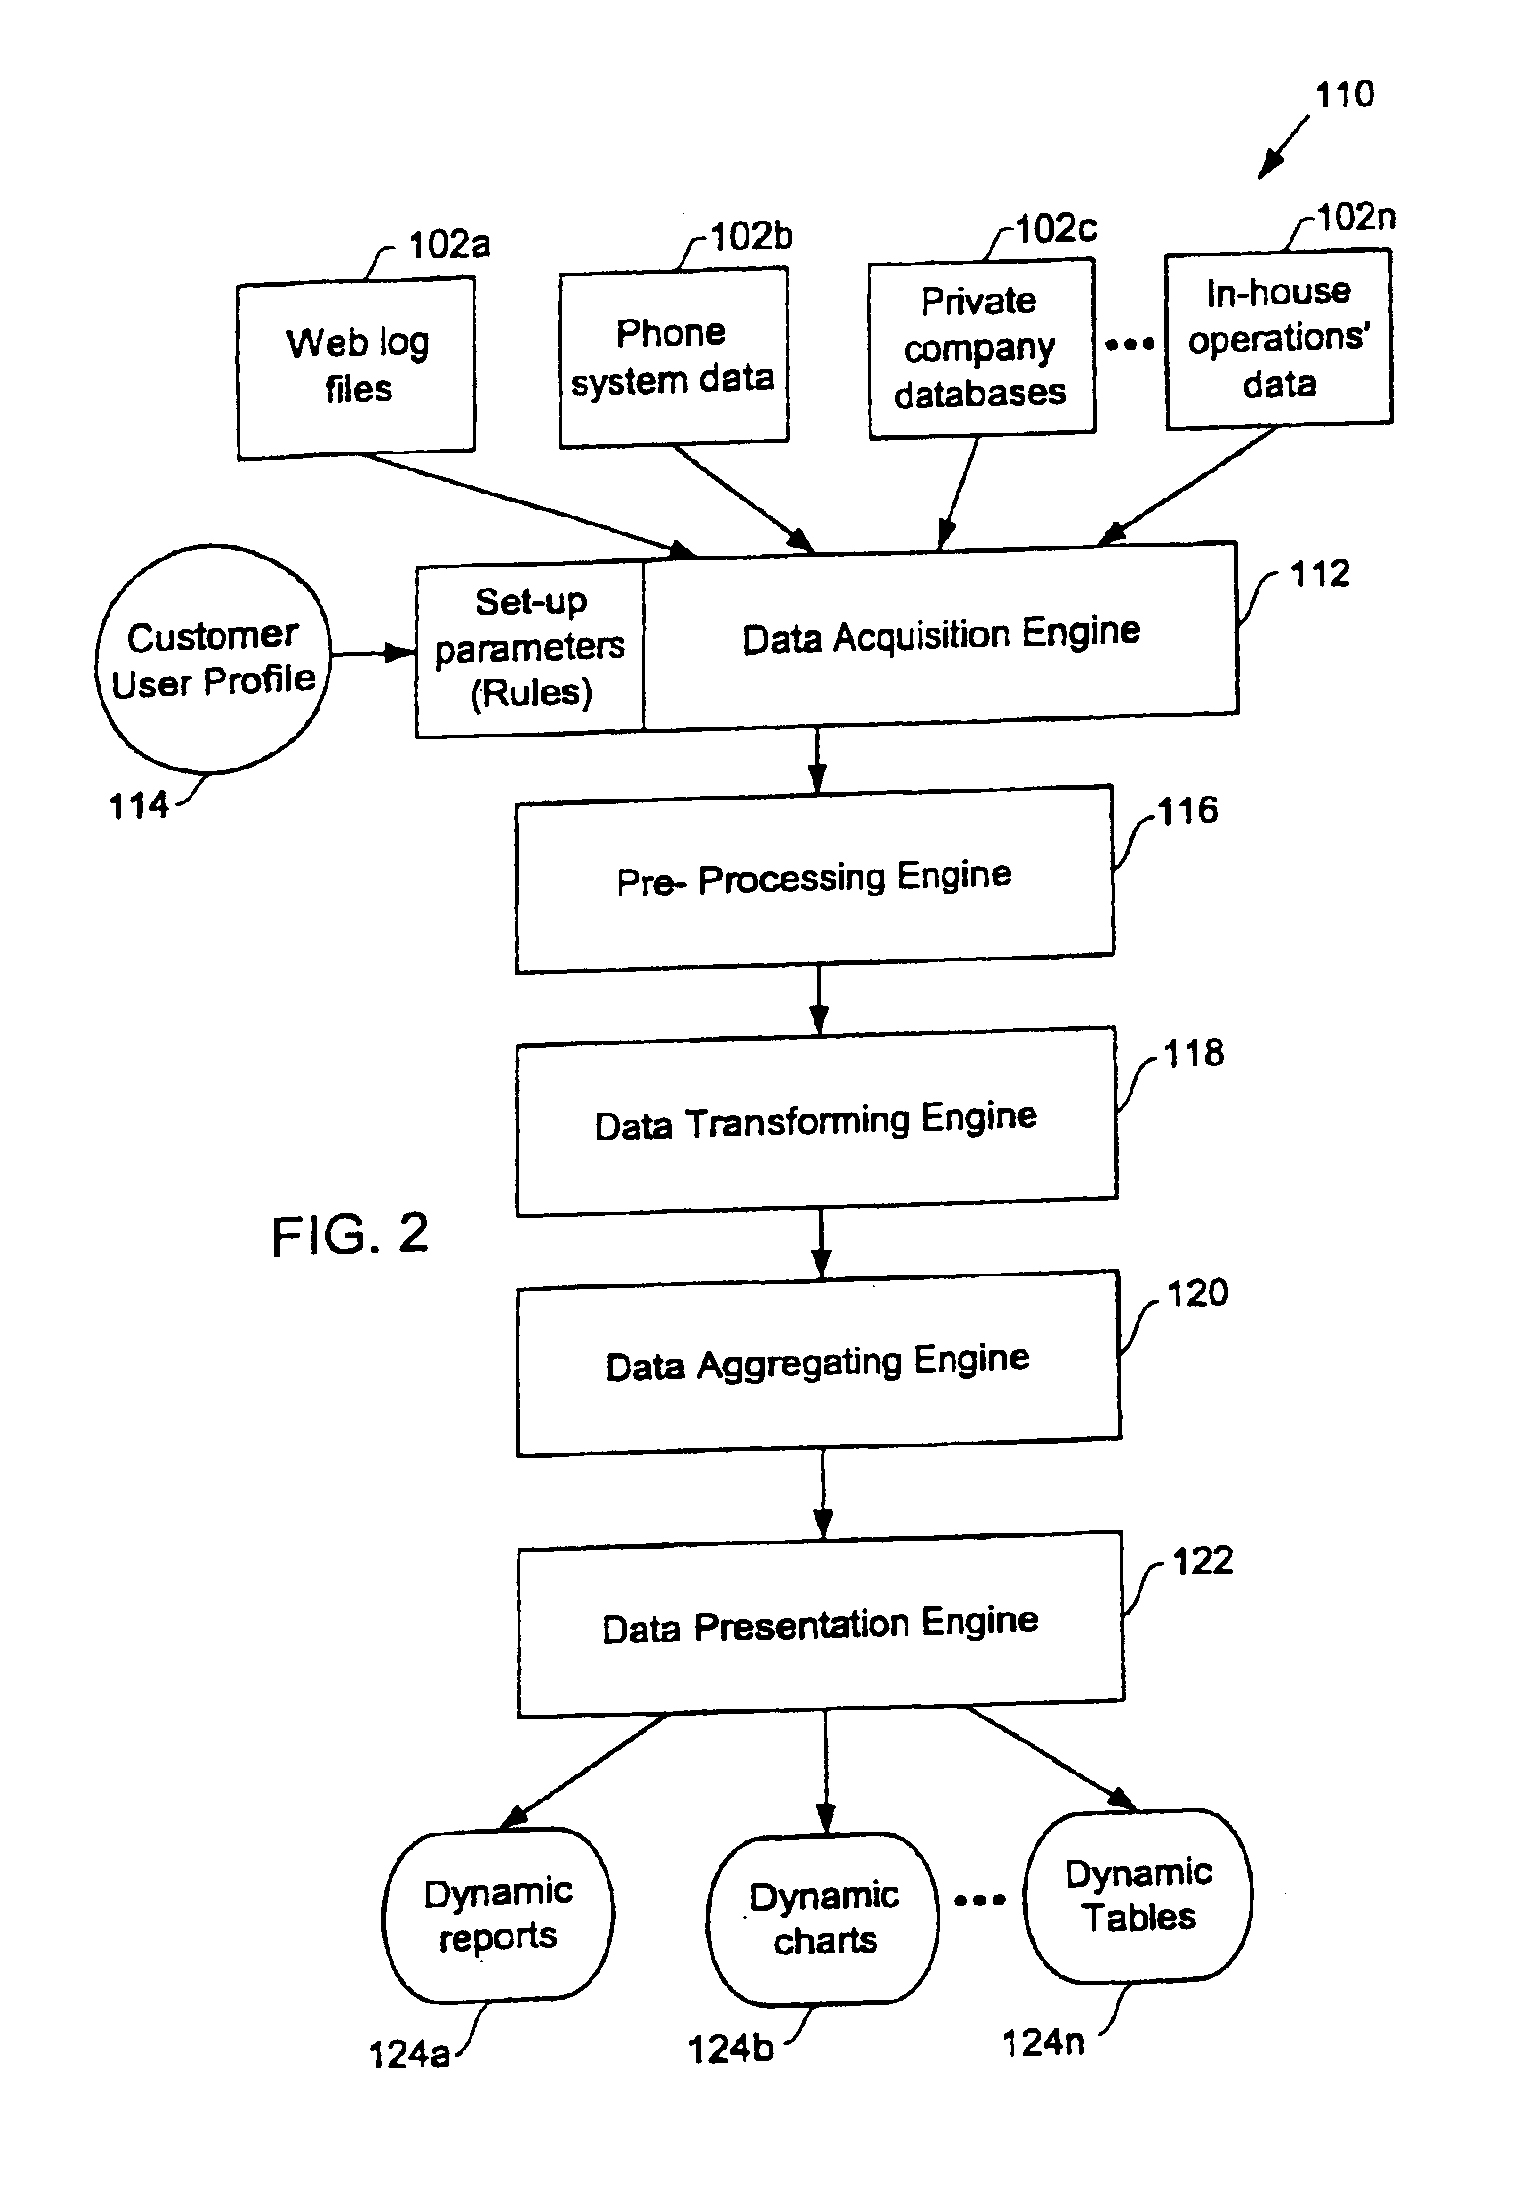 Methods for dynamically accessing, processing, and presenting data acquired from disparate data sources